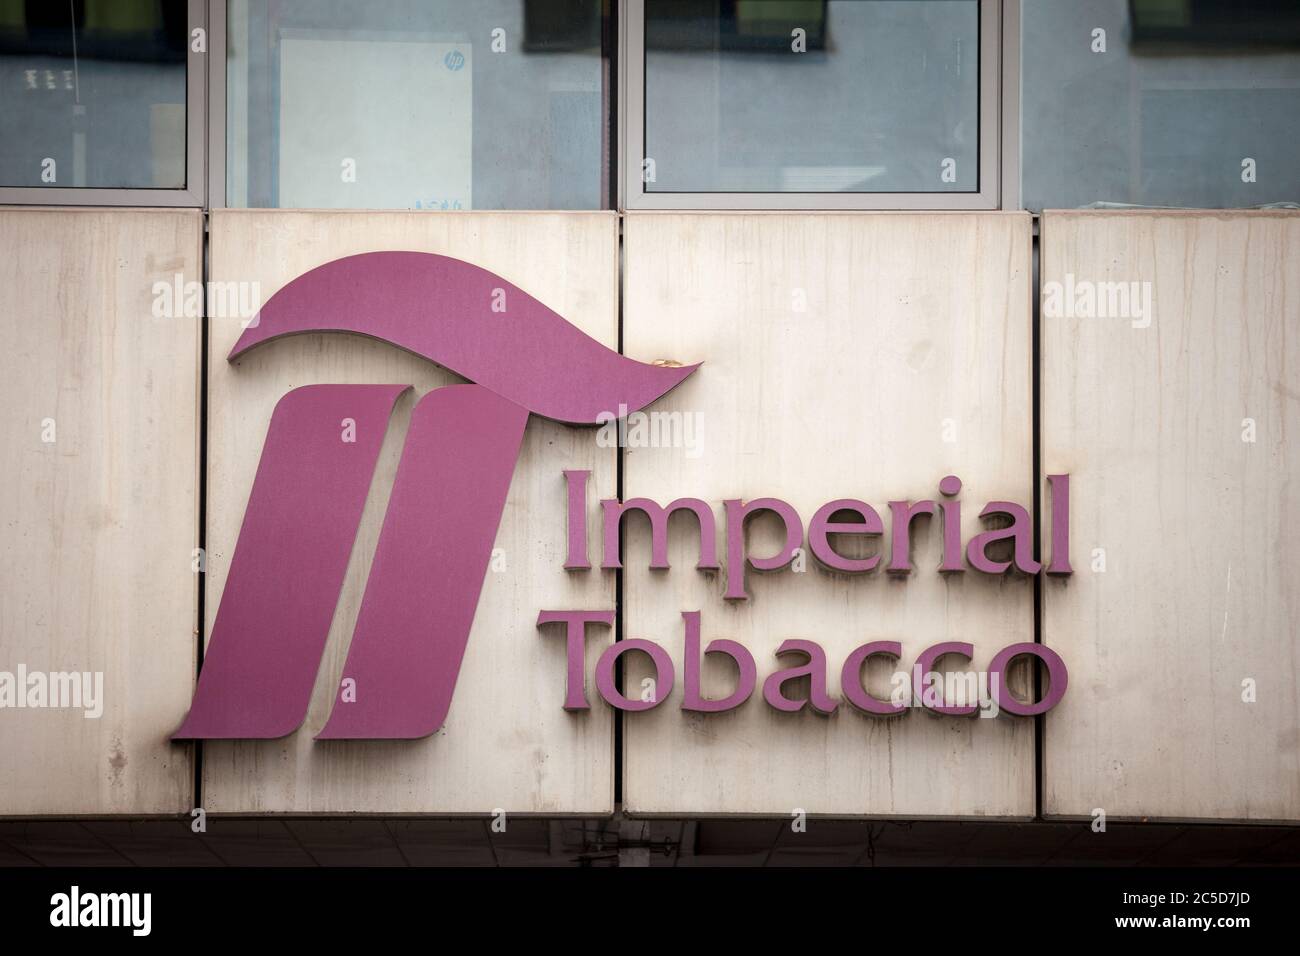 PRAGUE, CZECHIA - OCTOBER 31, 2019: Imperial tobacco logo in front of their office in Prague. Imperial Tobacco, or Imperial brands is a British tobacc Stock Photo